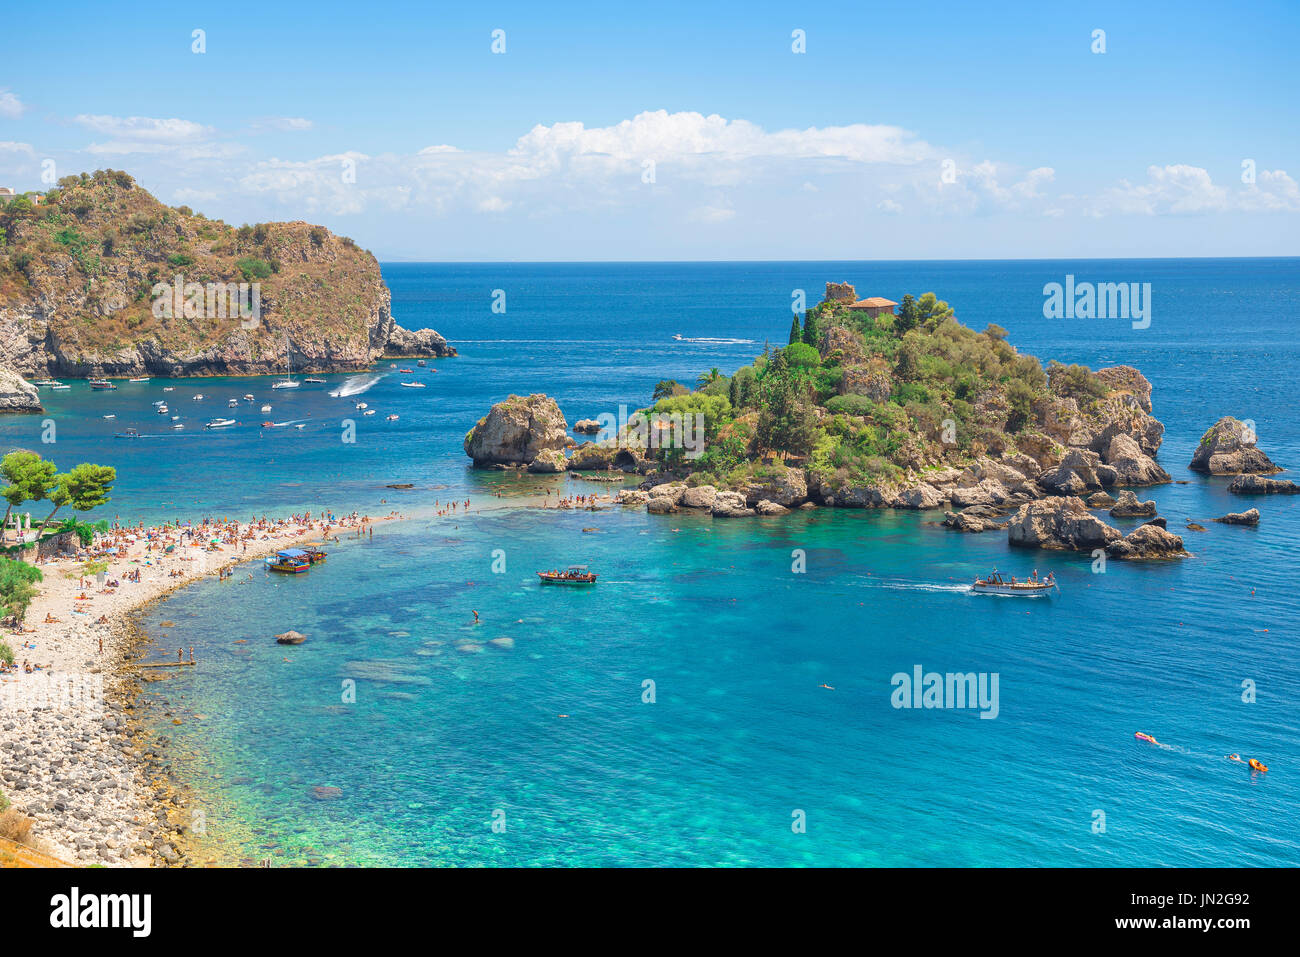 Isola Bella Sicily, view in summer of the beach at Mazzaro near Taormina, Sicily, showing the small island known as Isola Bella - beautiful island. Stock Photo